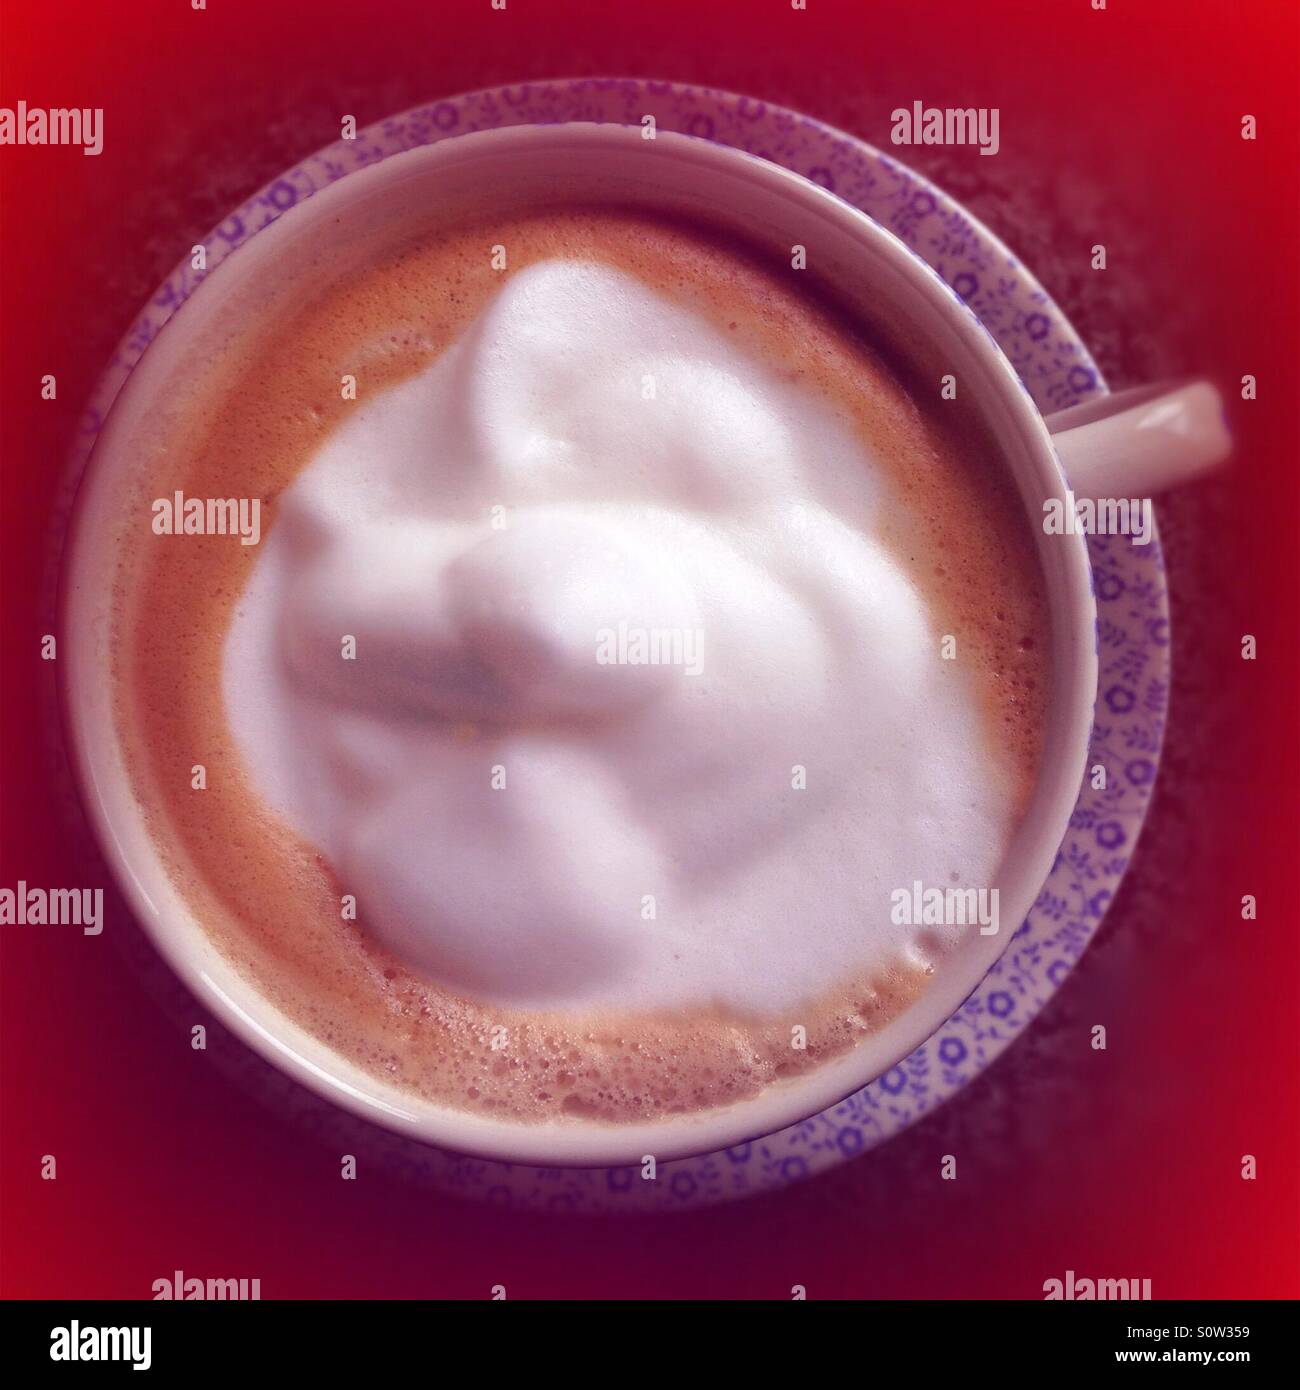 Latte coffee in blue cup and saucer, with red background Stock Photo